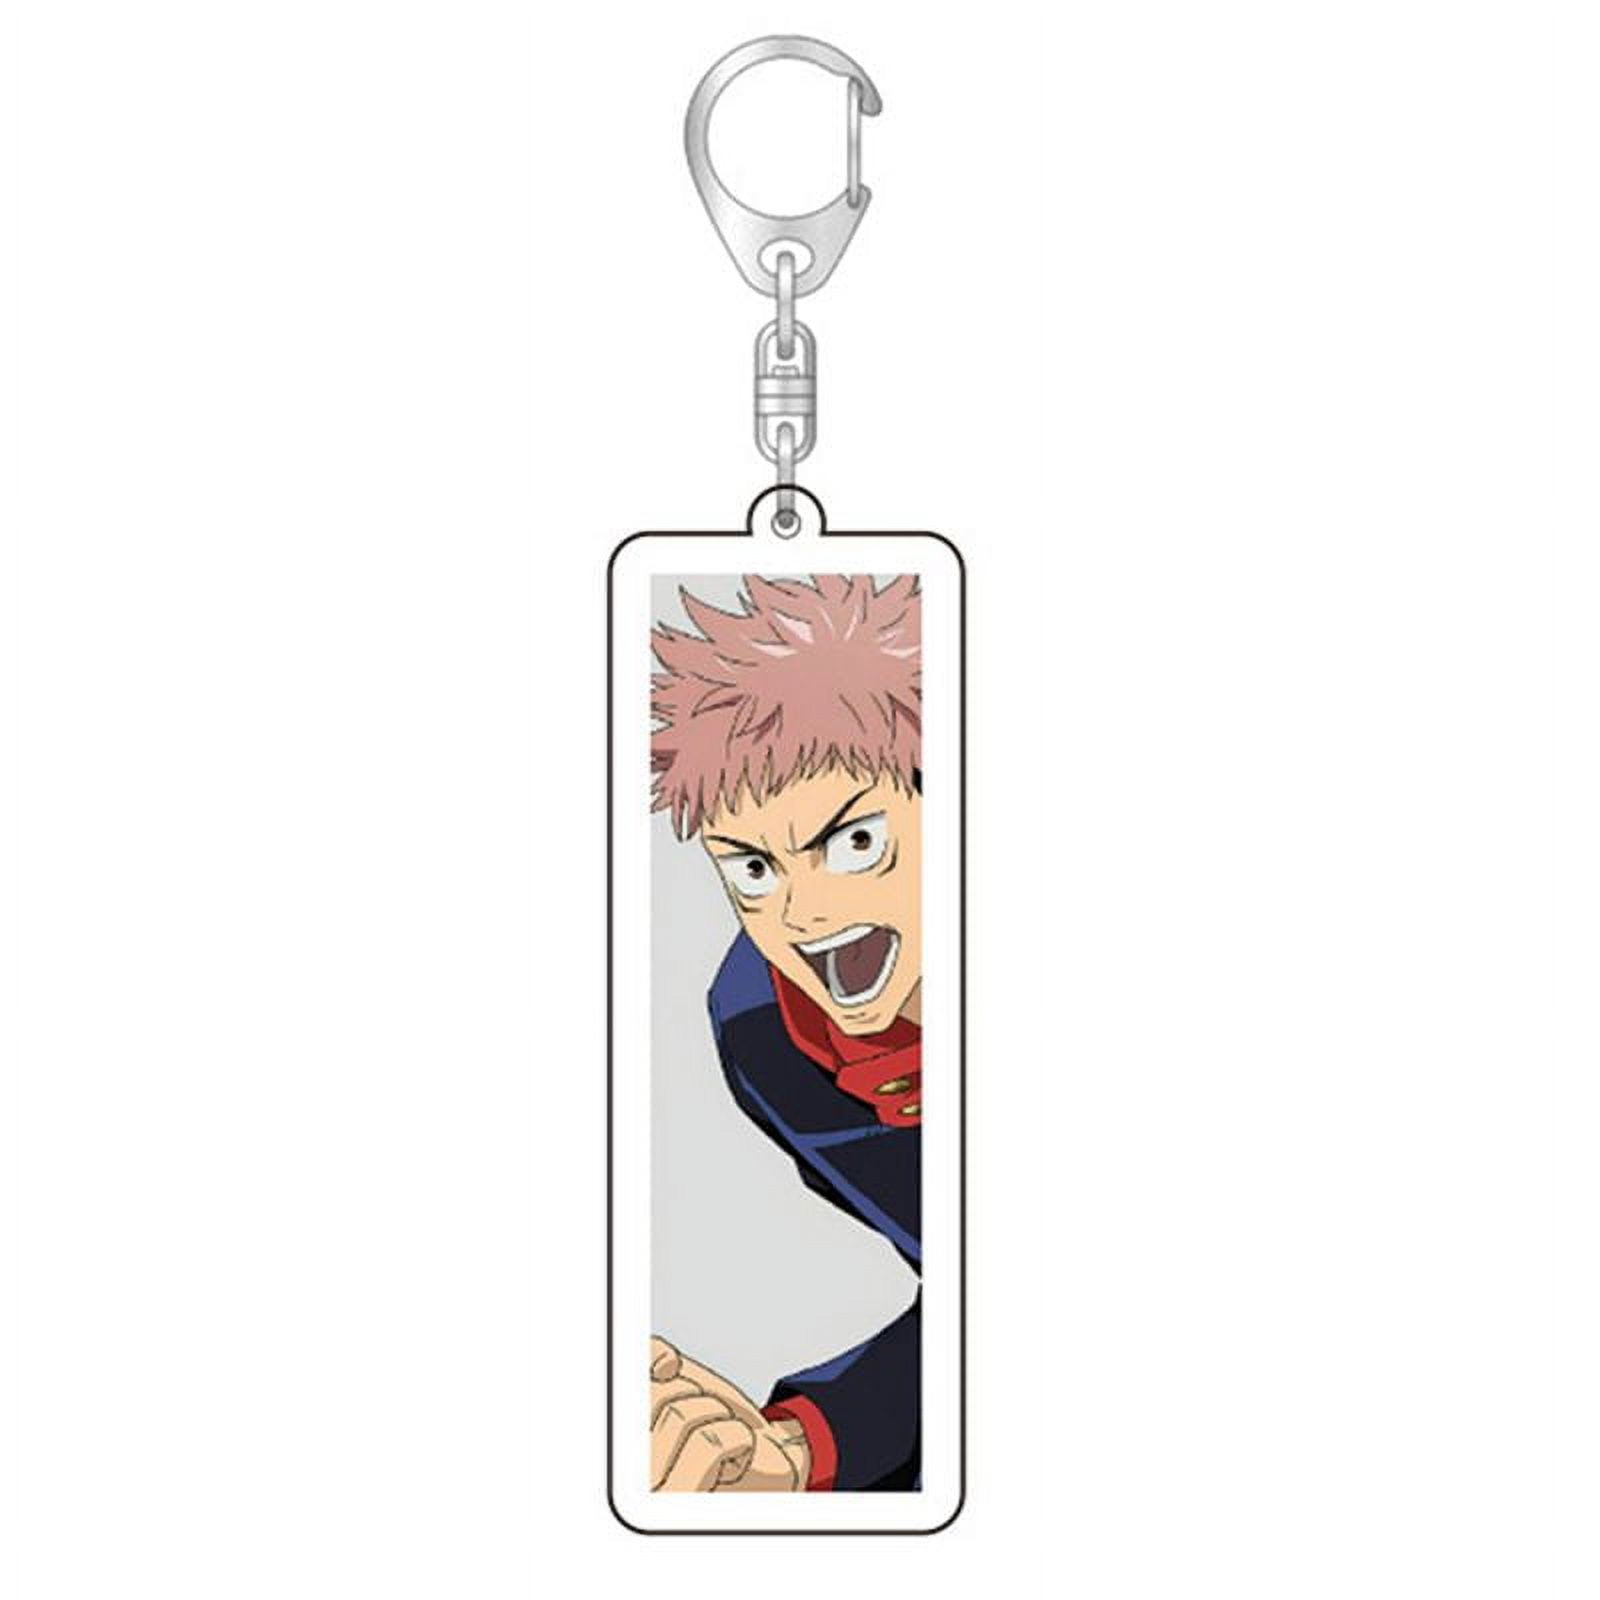 Jujutsu Kaisen PVC Bleach Keychain Classic Cartoon Anime Figure Double  Sided Key Ring For Bags, Fans, And Collectors Perfect Key Holder And Gift  From Youne, $1.12